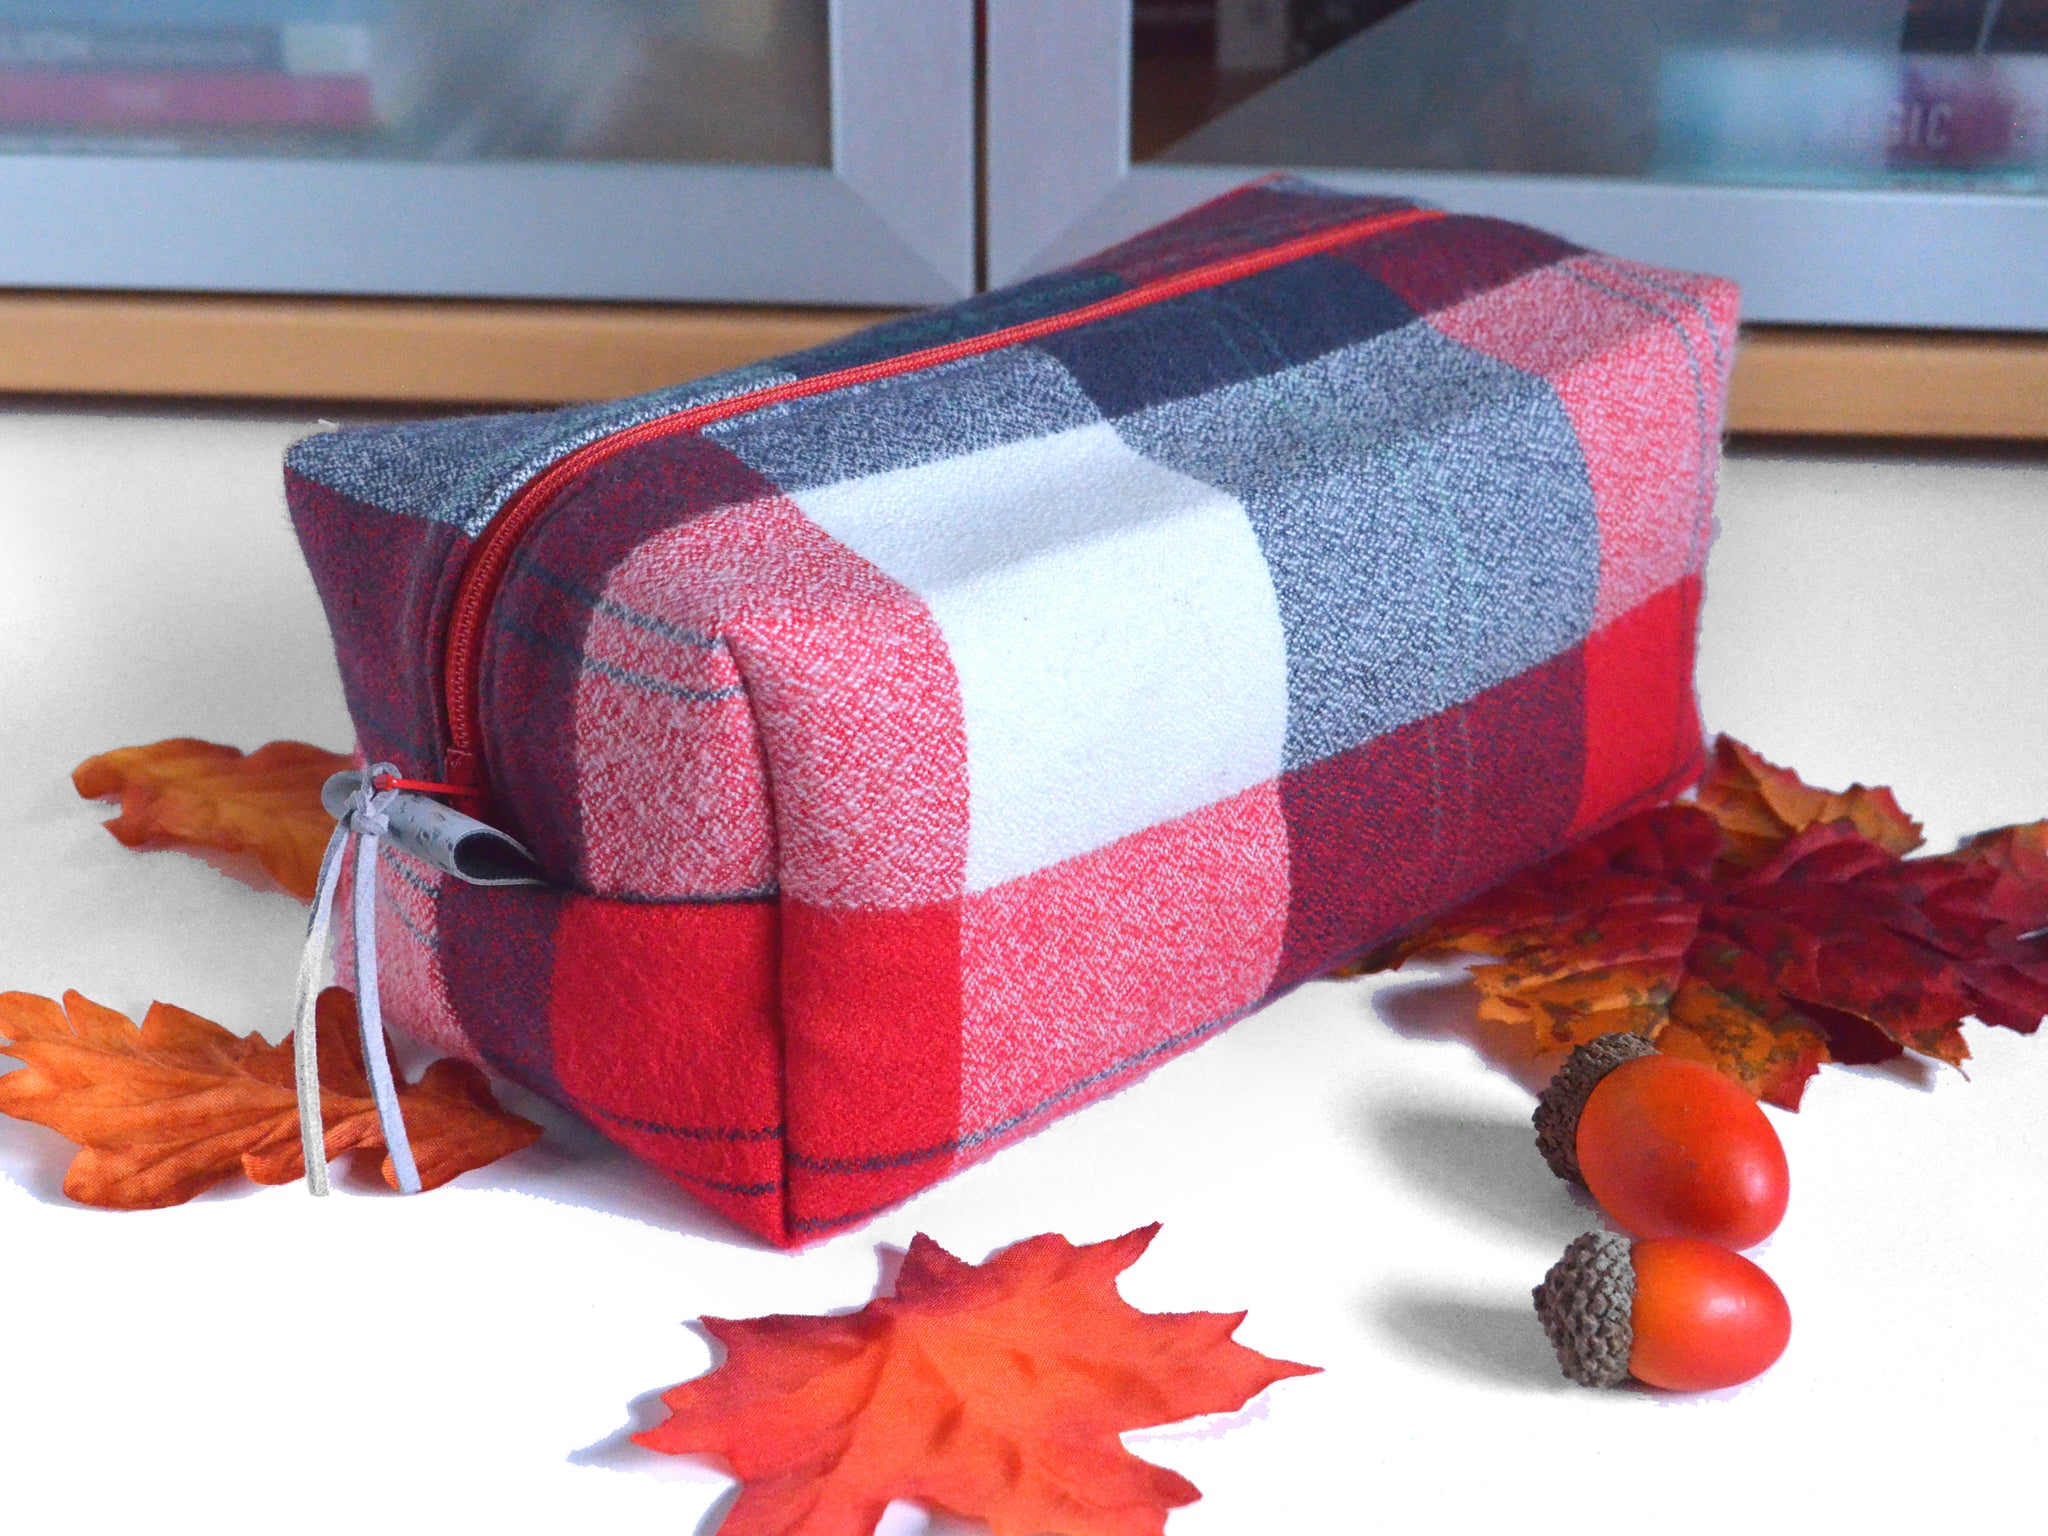 Red & Navy Plaid Flannel Toiletry Bag